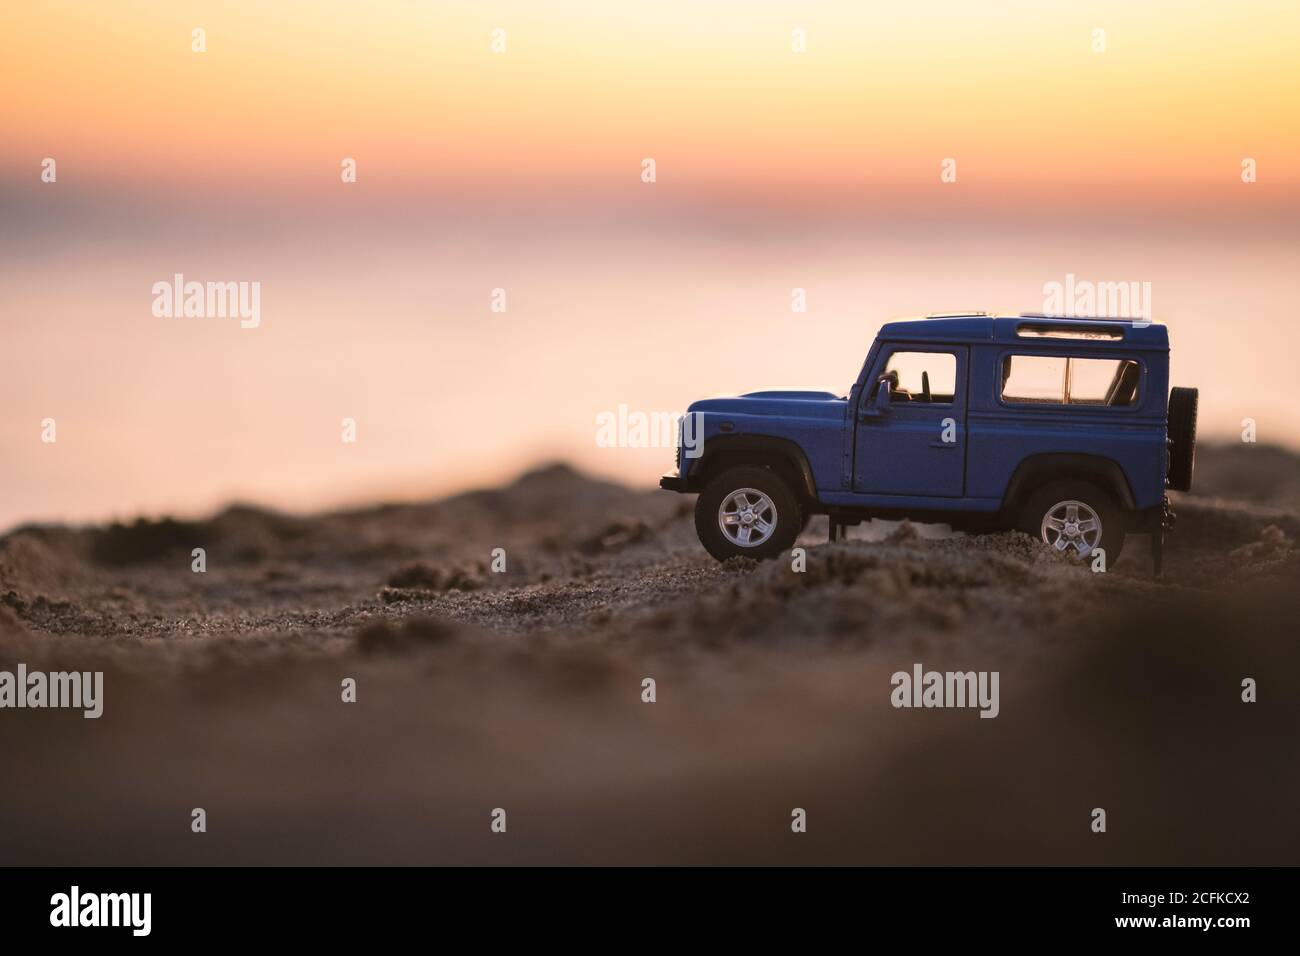 Izmir, Turkey - August 22, 2020: Close up shot of a Land Rover SUV vehicle on sand and on sunset. Stock Photo